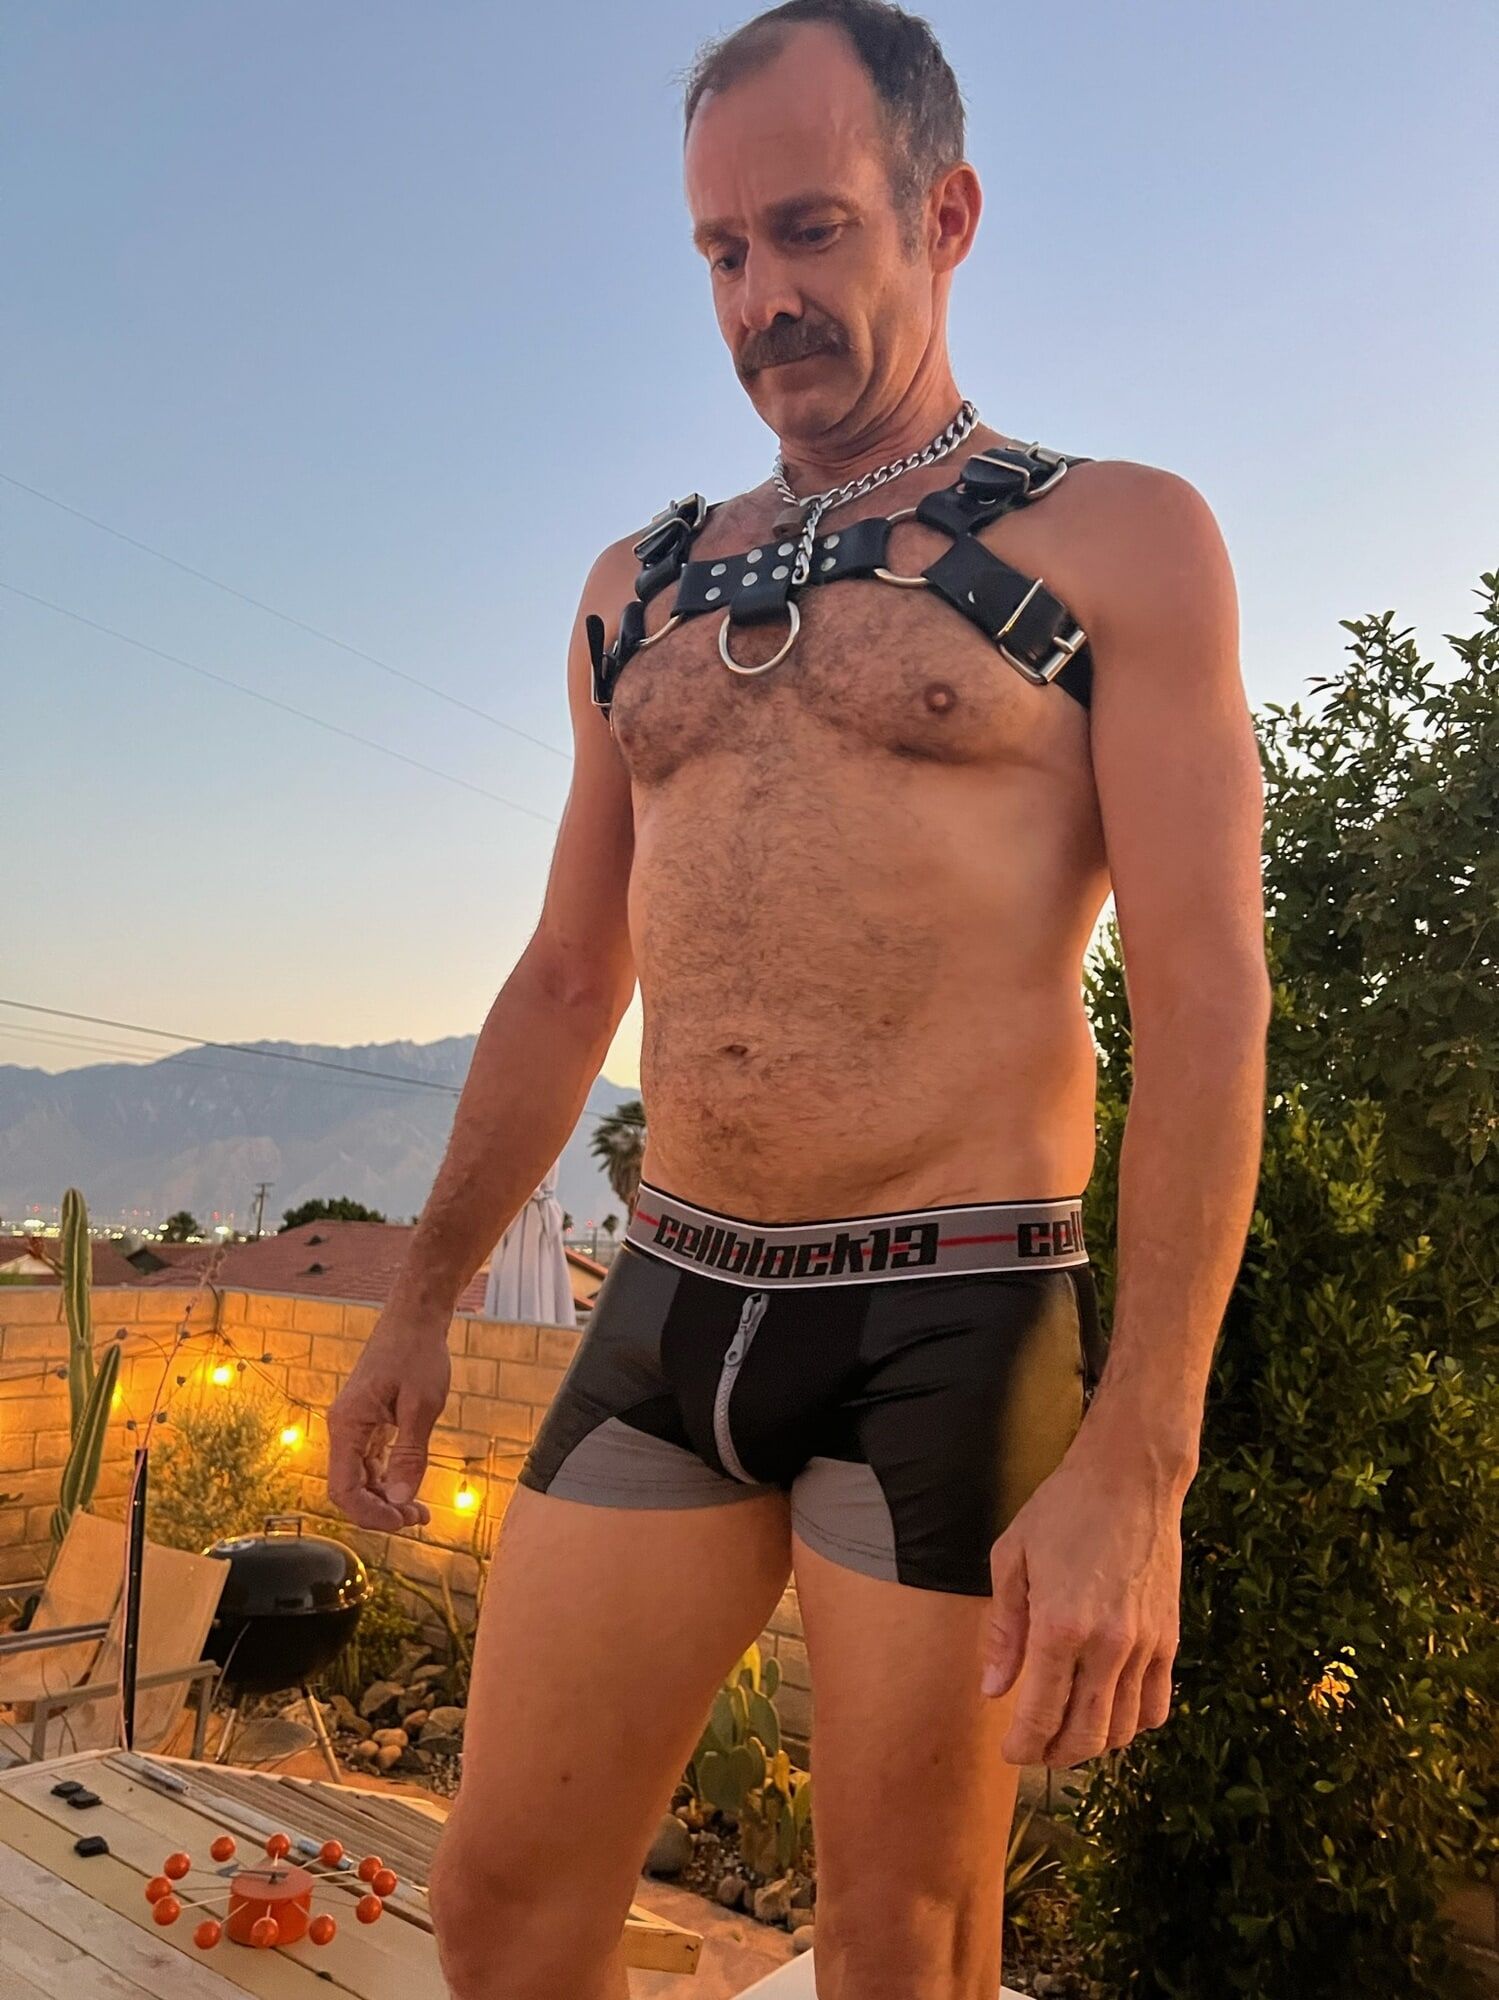 Sunset Pics in Leather #2